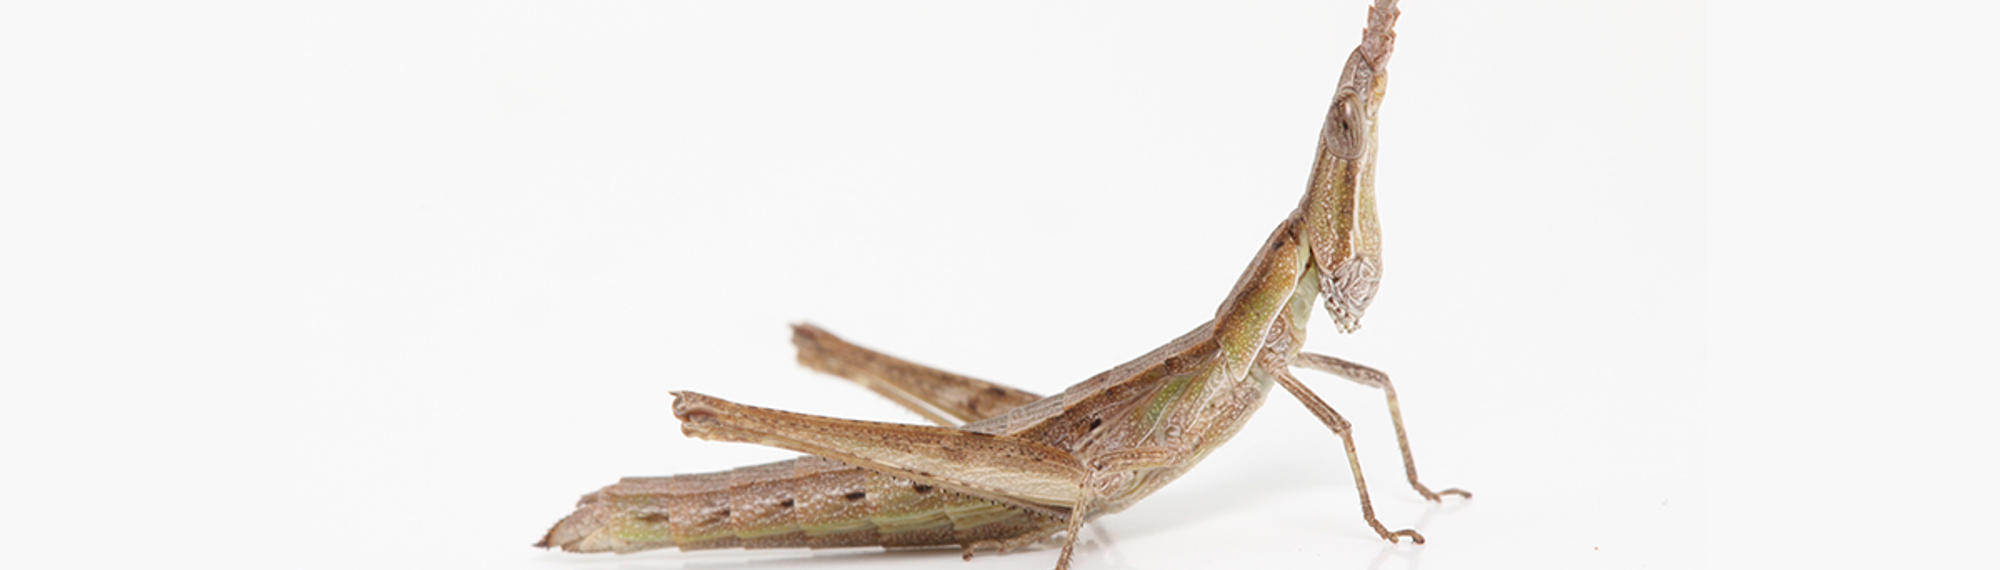 Key's Matchstick Grasshopper in front of a white background. It is brown with a pointed head. 